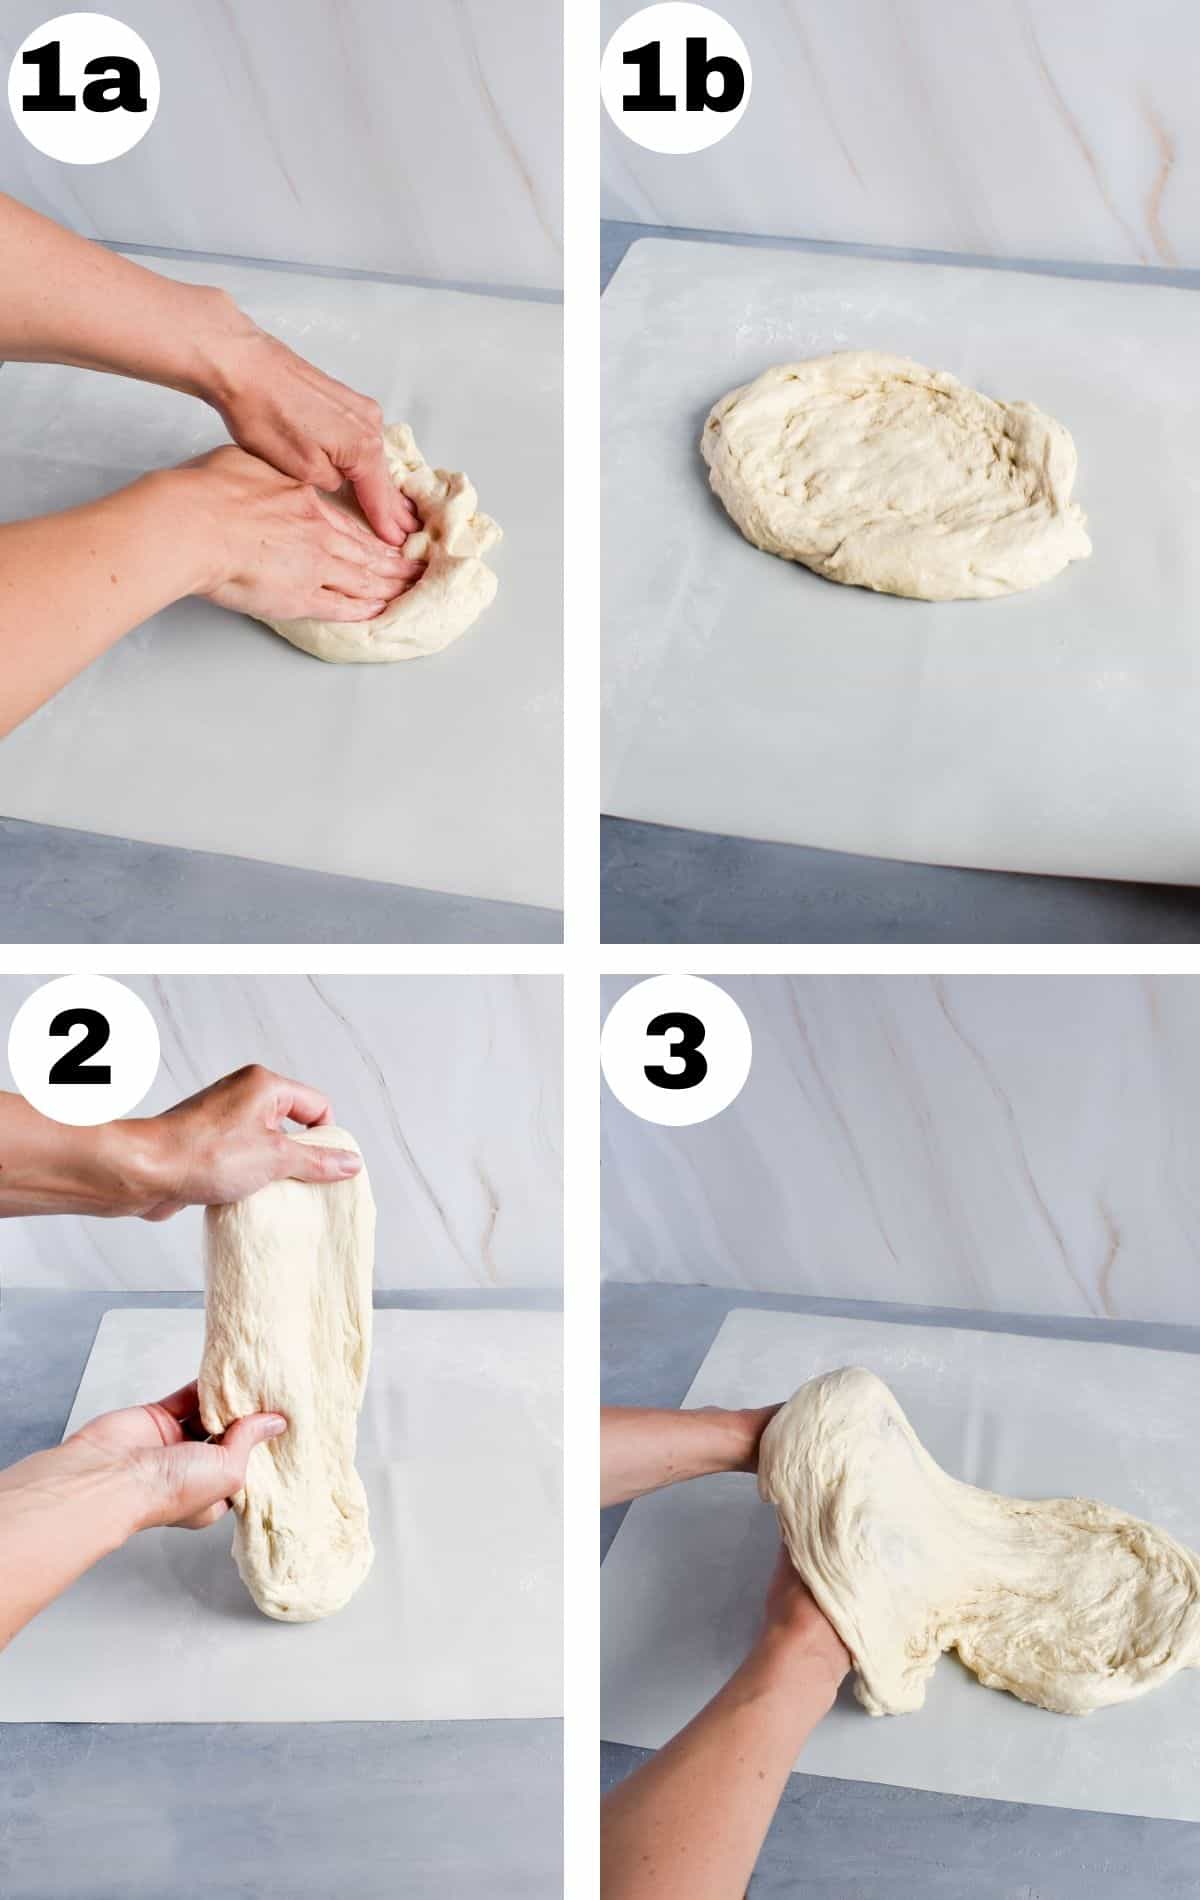 4 images showing pizza dough being stretched. 